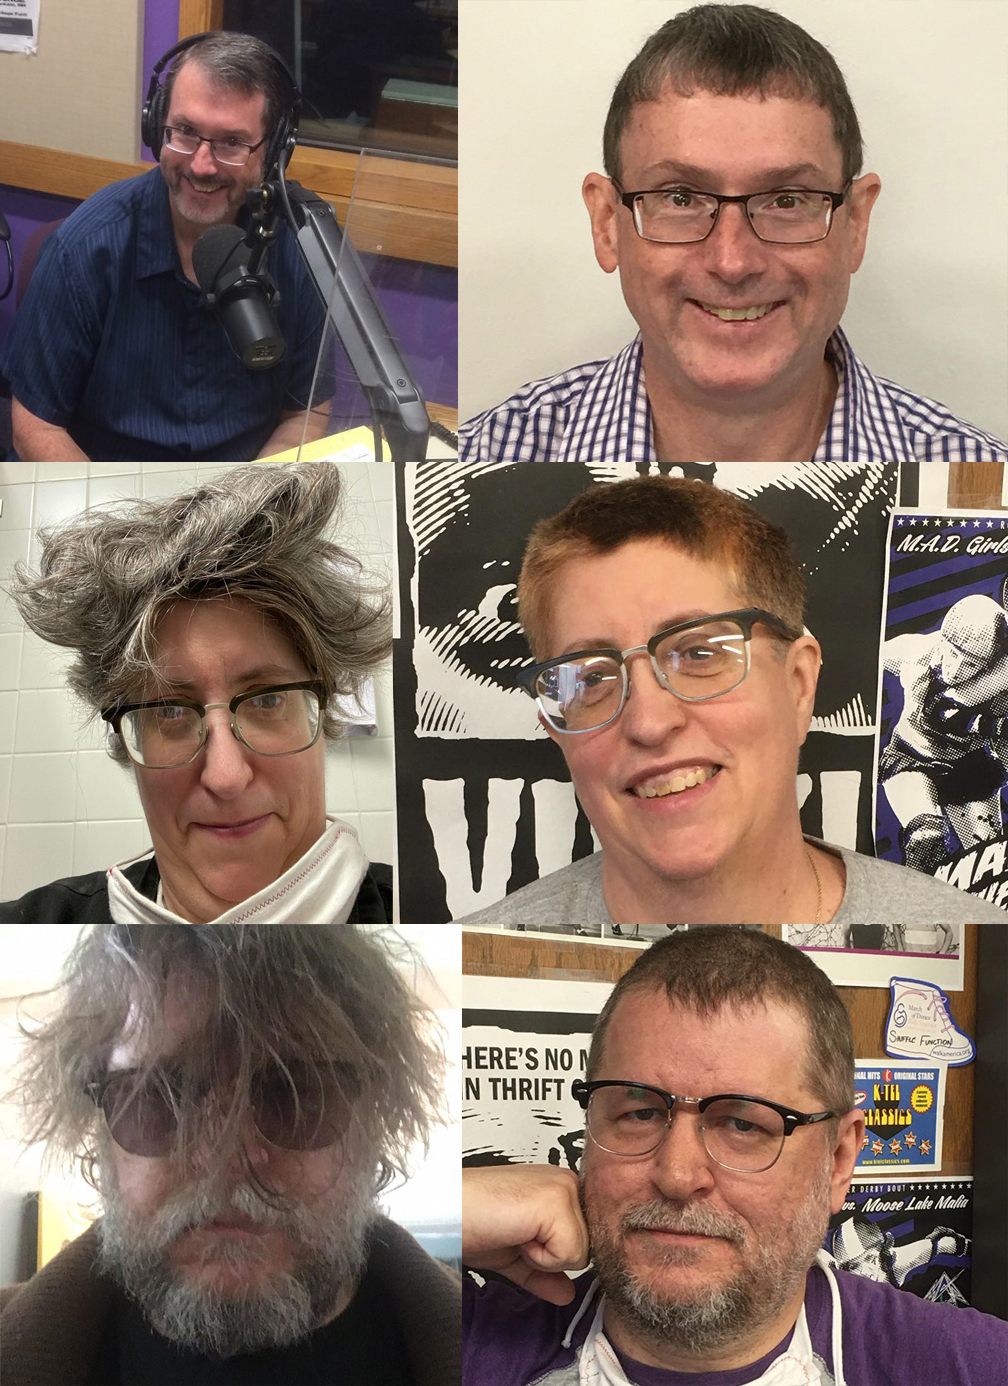 a collage of a person and person wearing glasses